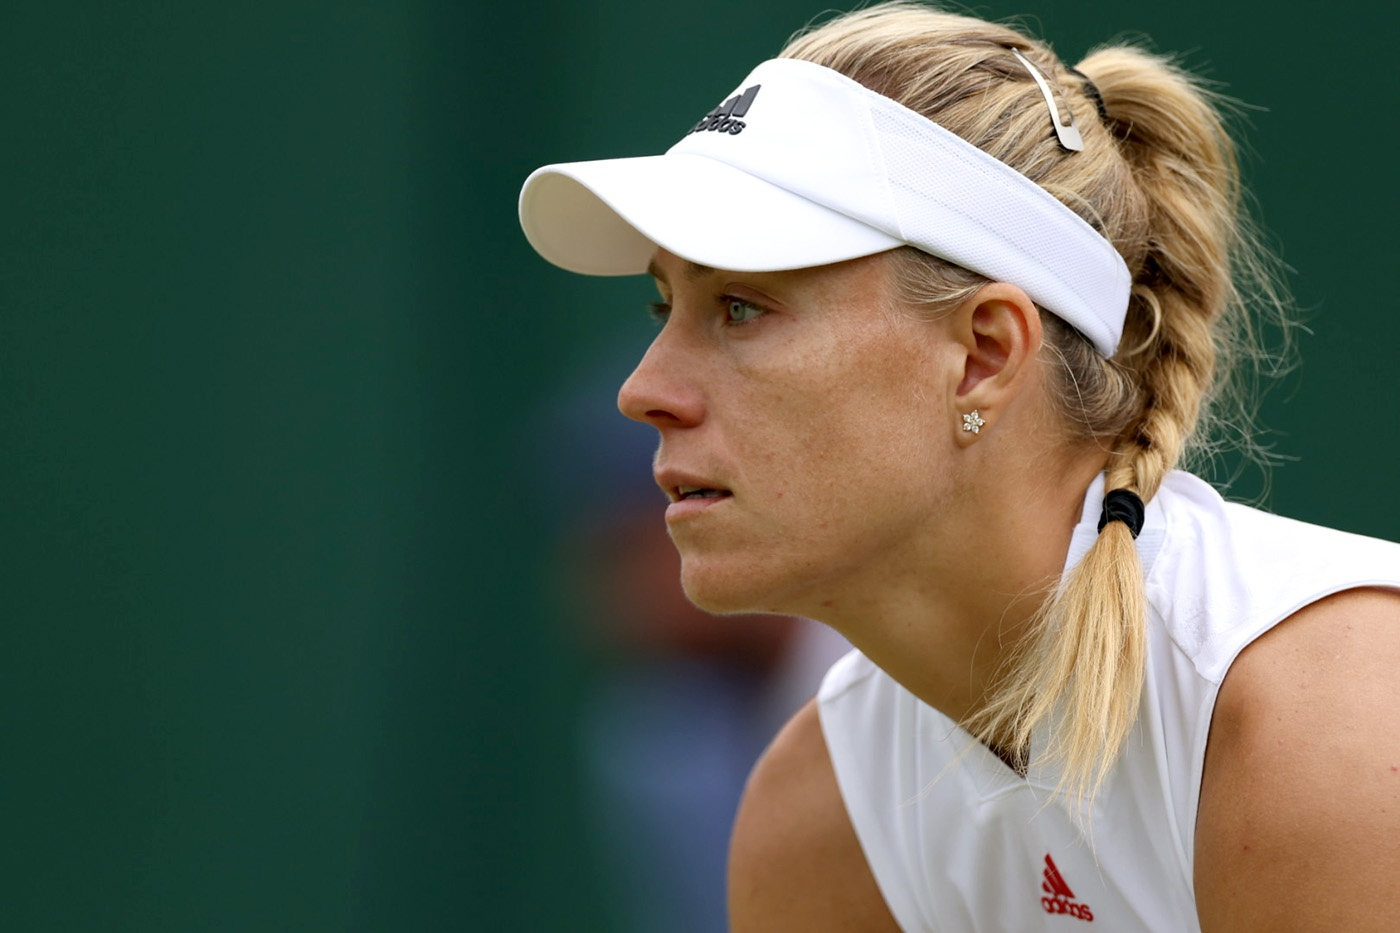 US Open Update: Angelique Kerber to face off against Sloane Stephens